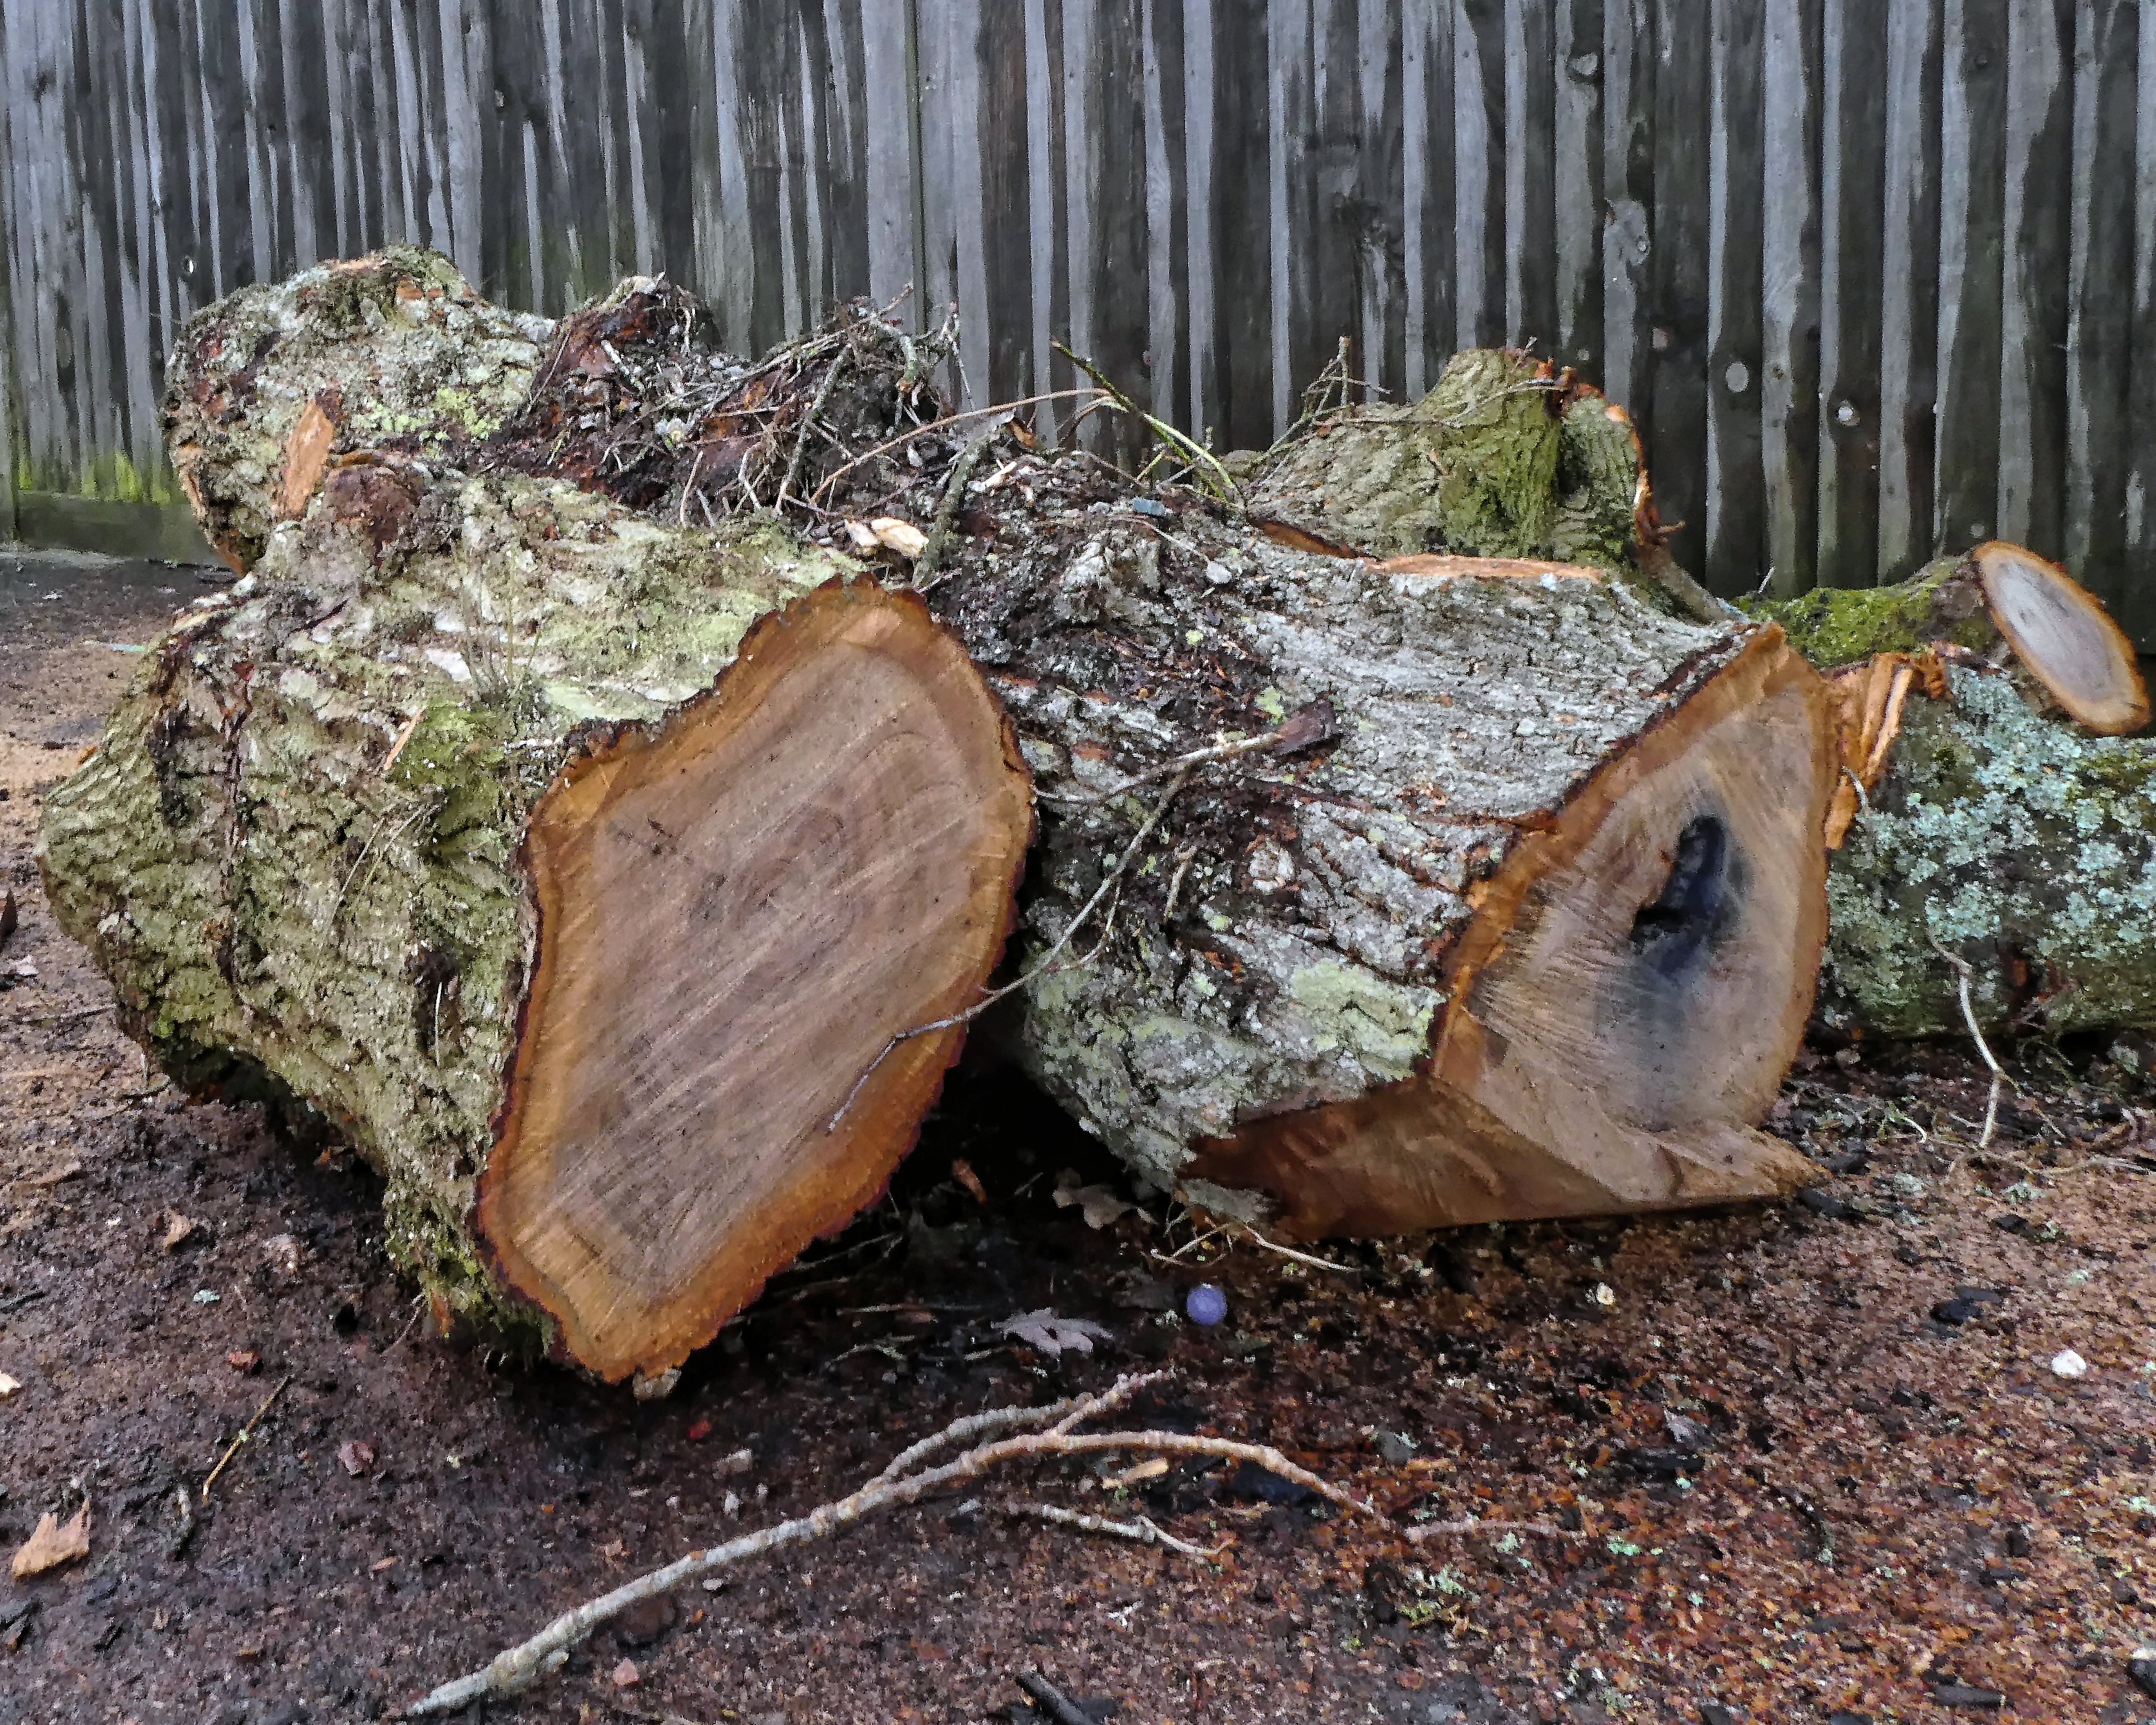 File:Cut tree trunks at The Plough in Lower Beeding, West Sussex,  England.jpg - Wikimedia Commons